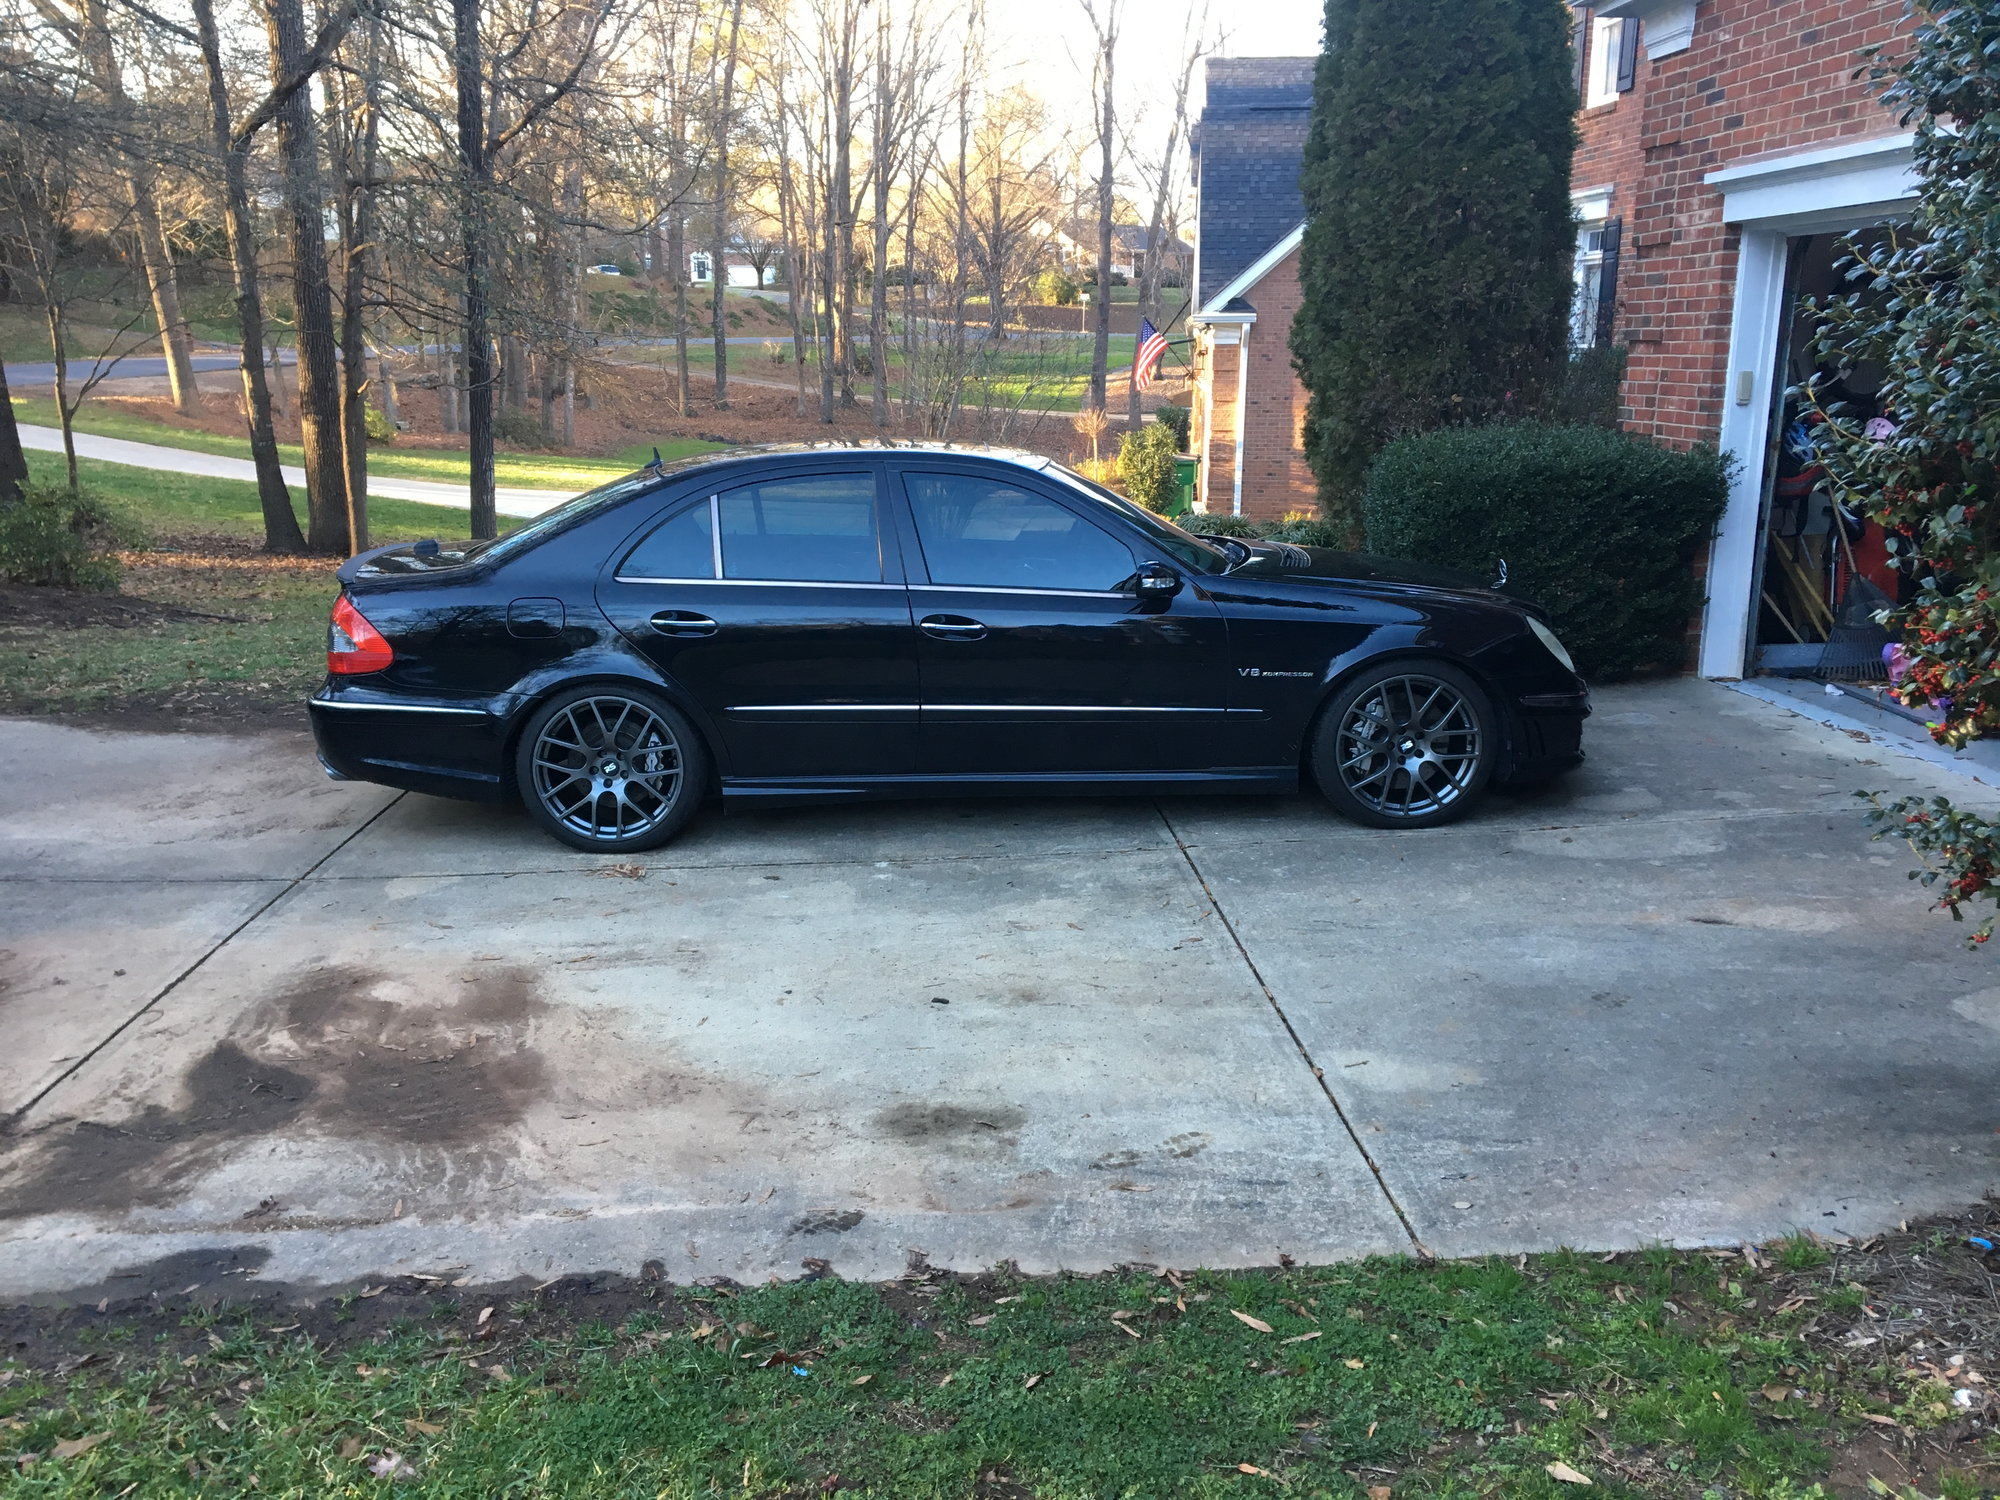 2005 Mercedes-Benz E55 AMG - 2005 E55 AMG for sale - Used - VIN WDBUF76J65A671455 - 113,500 Miles - 8 cyl - 2WD - Automatic - Sedan - Black - Charlotte, NC 28210, United States